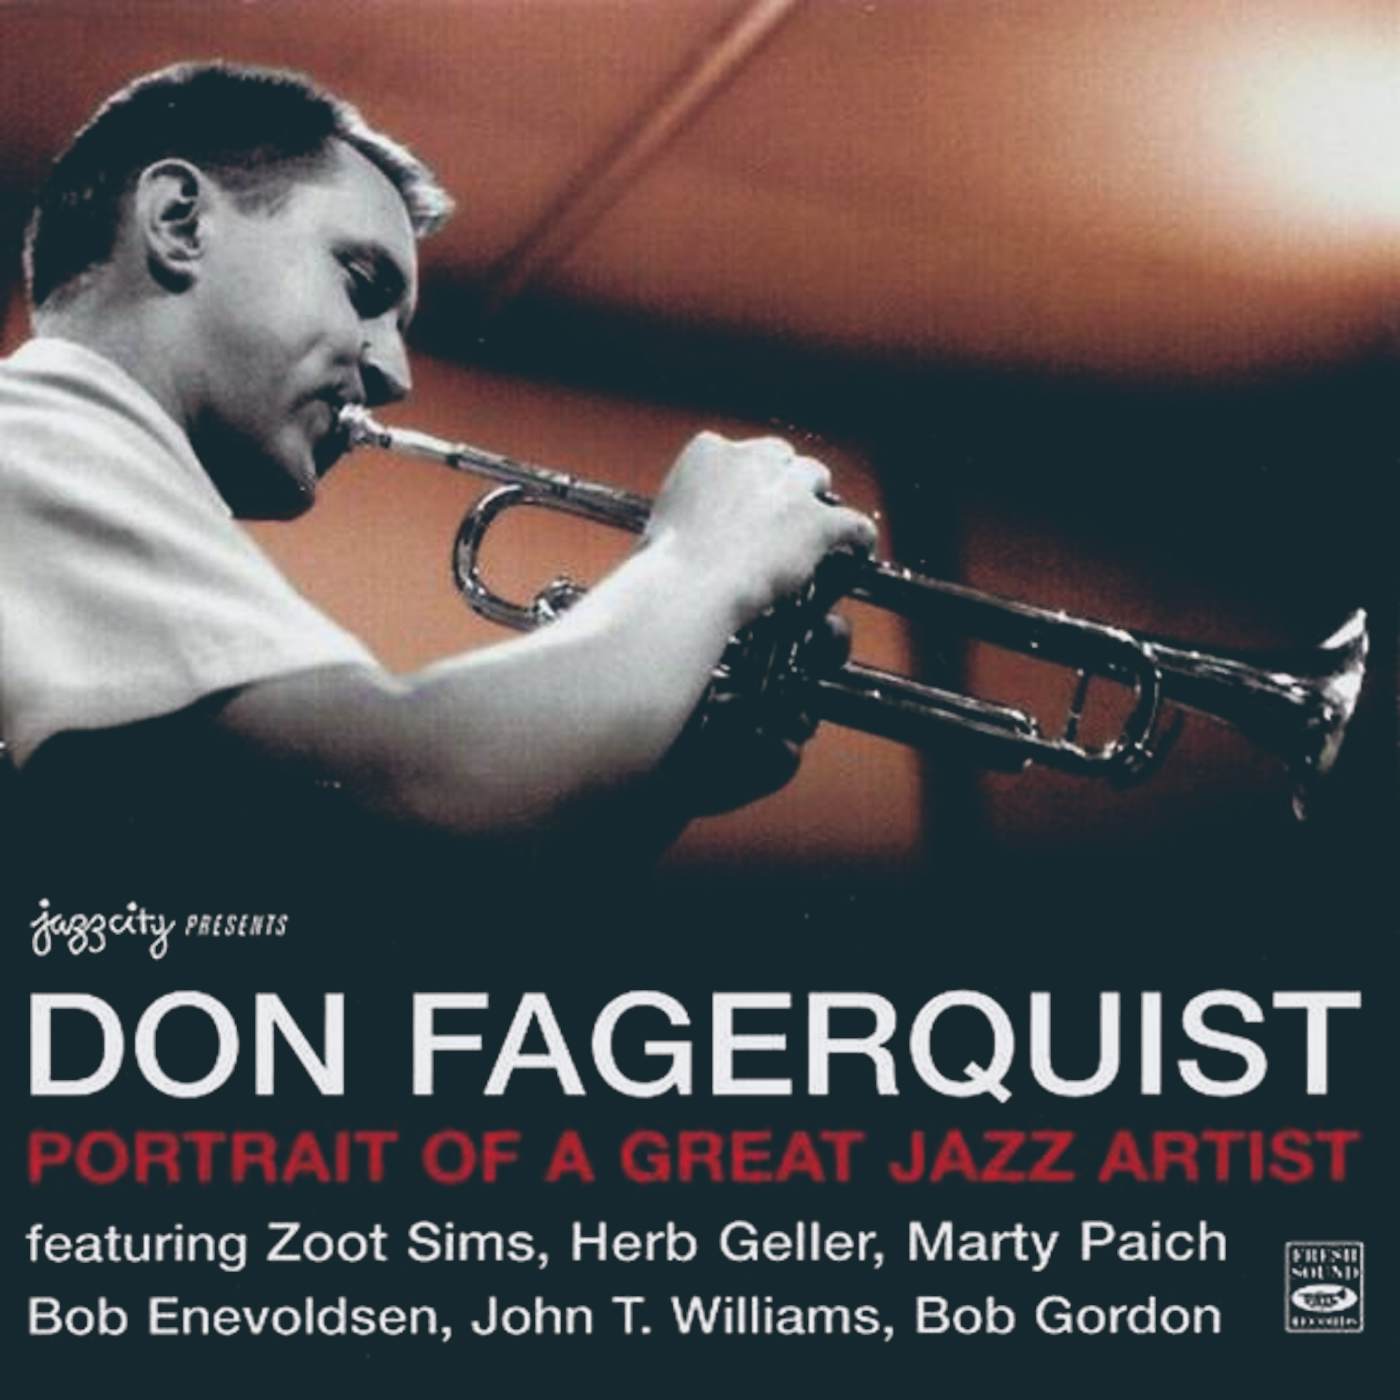 Don Fagerquist